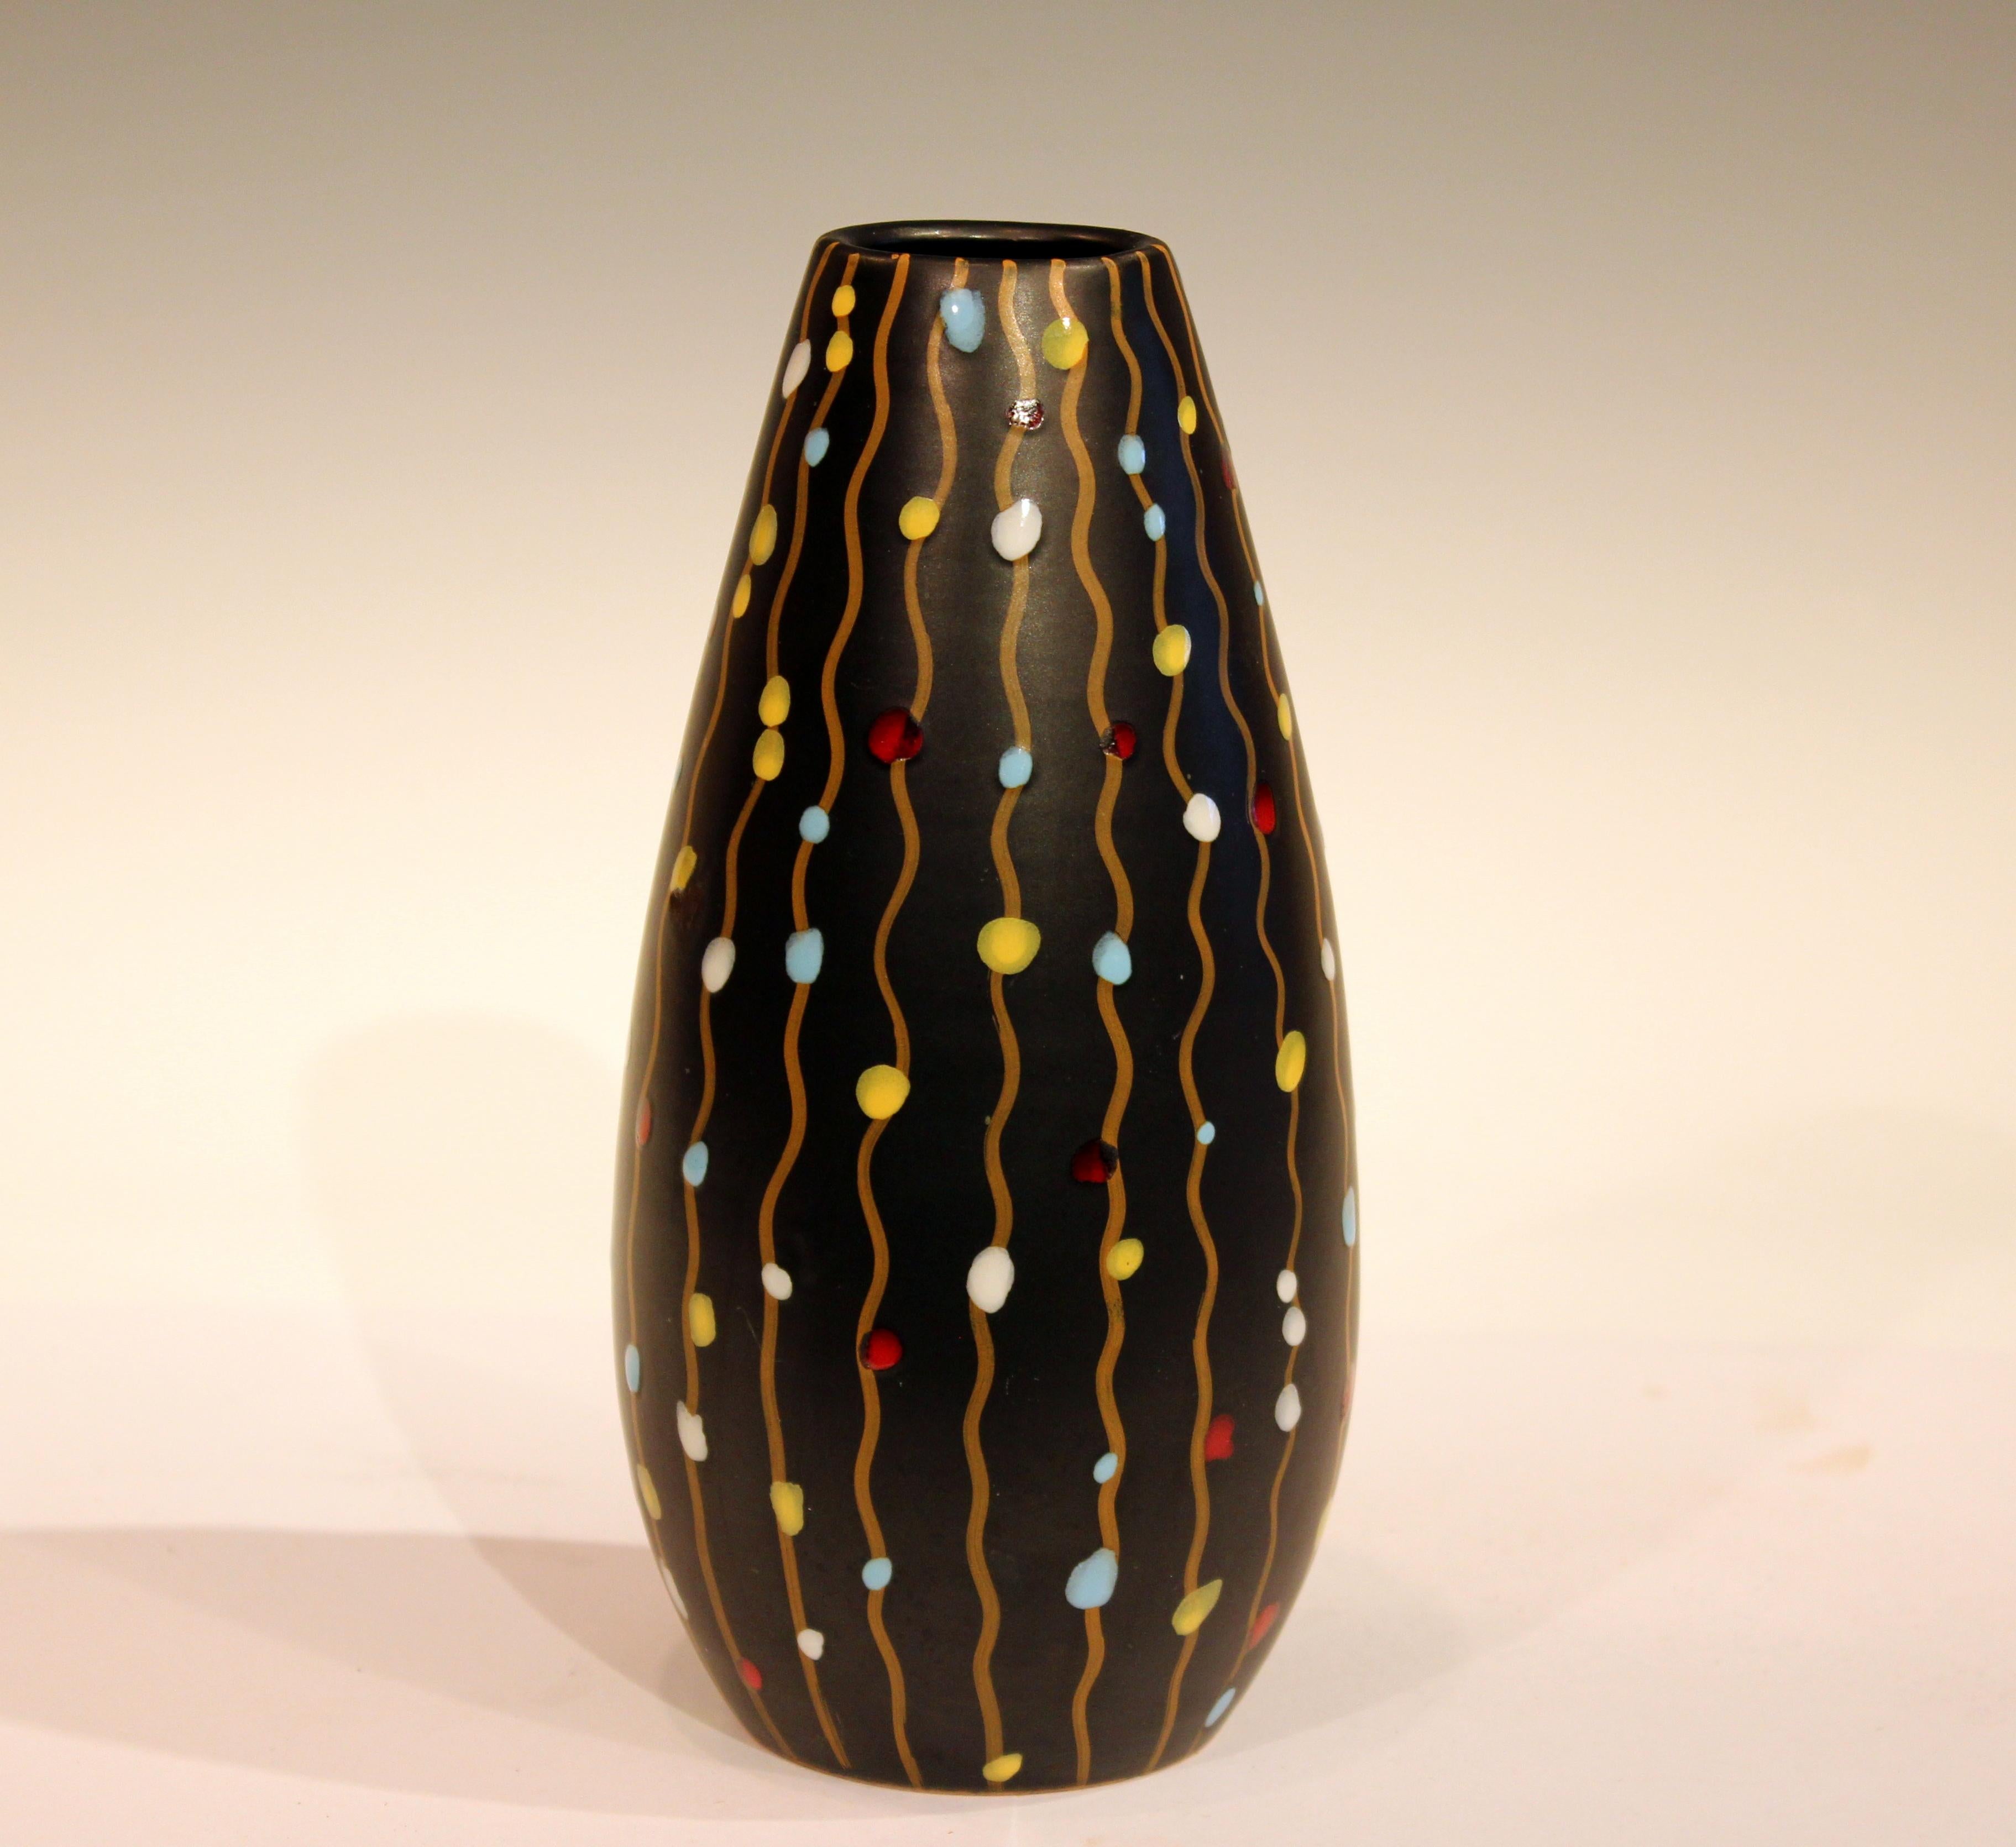 Early V mark 1950s Bitossi vase decorated with hanging party lights on a black ground, circa 1950s. 8 1/2